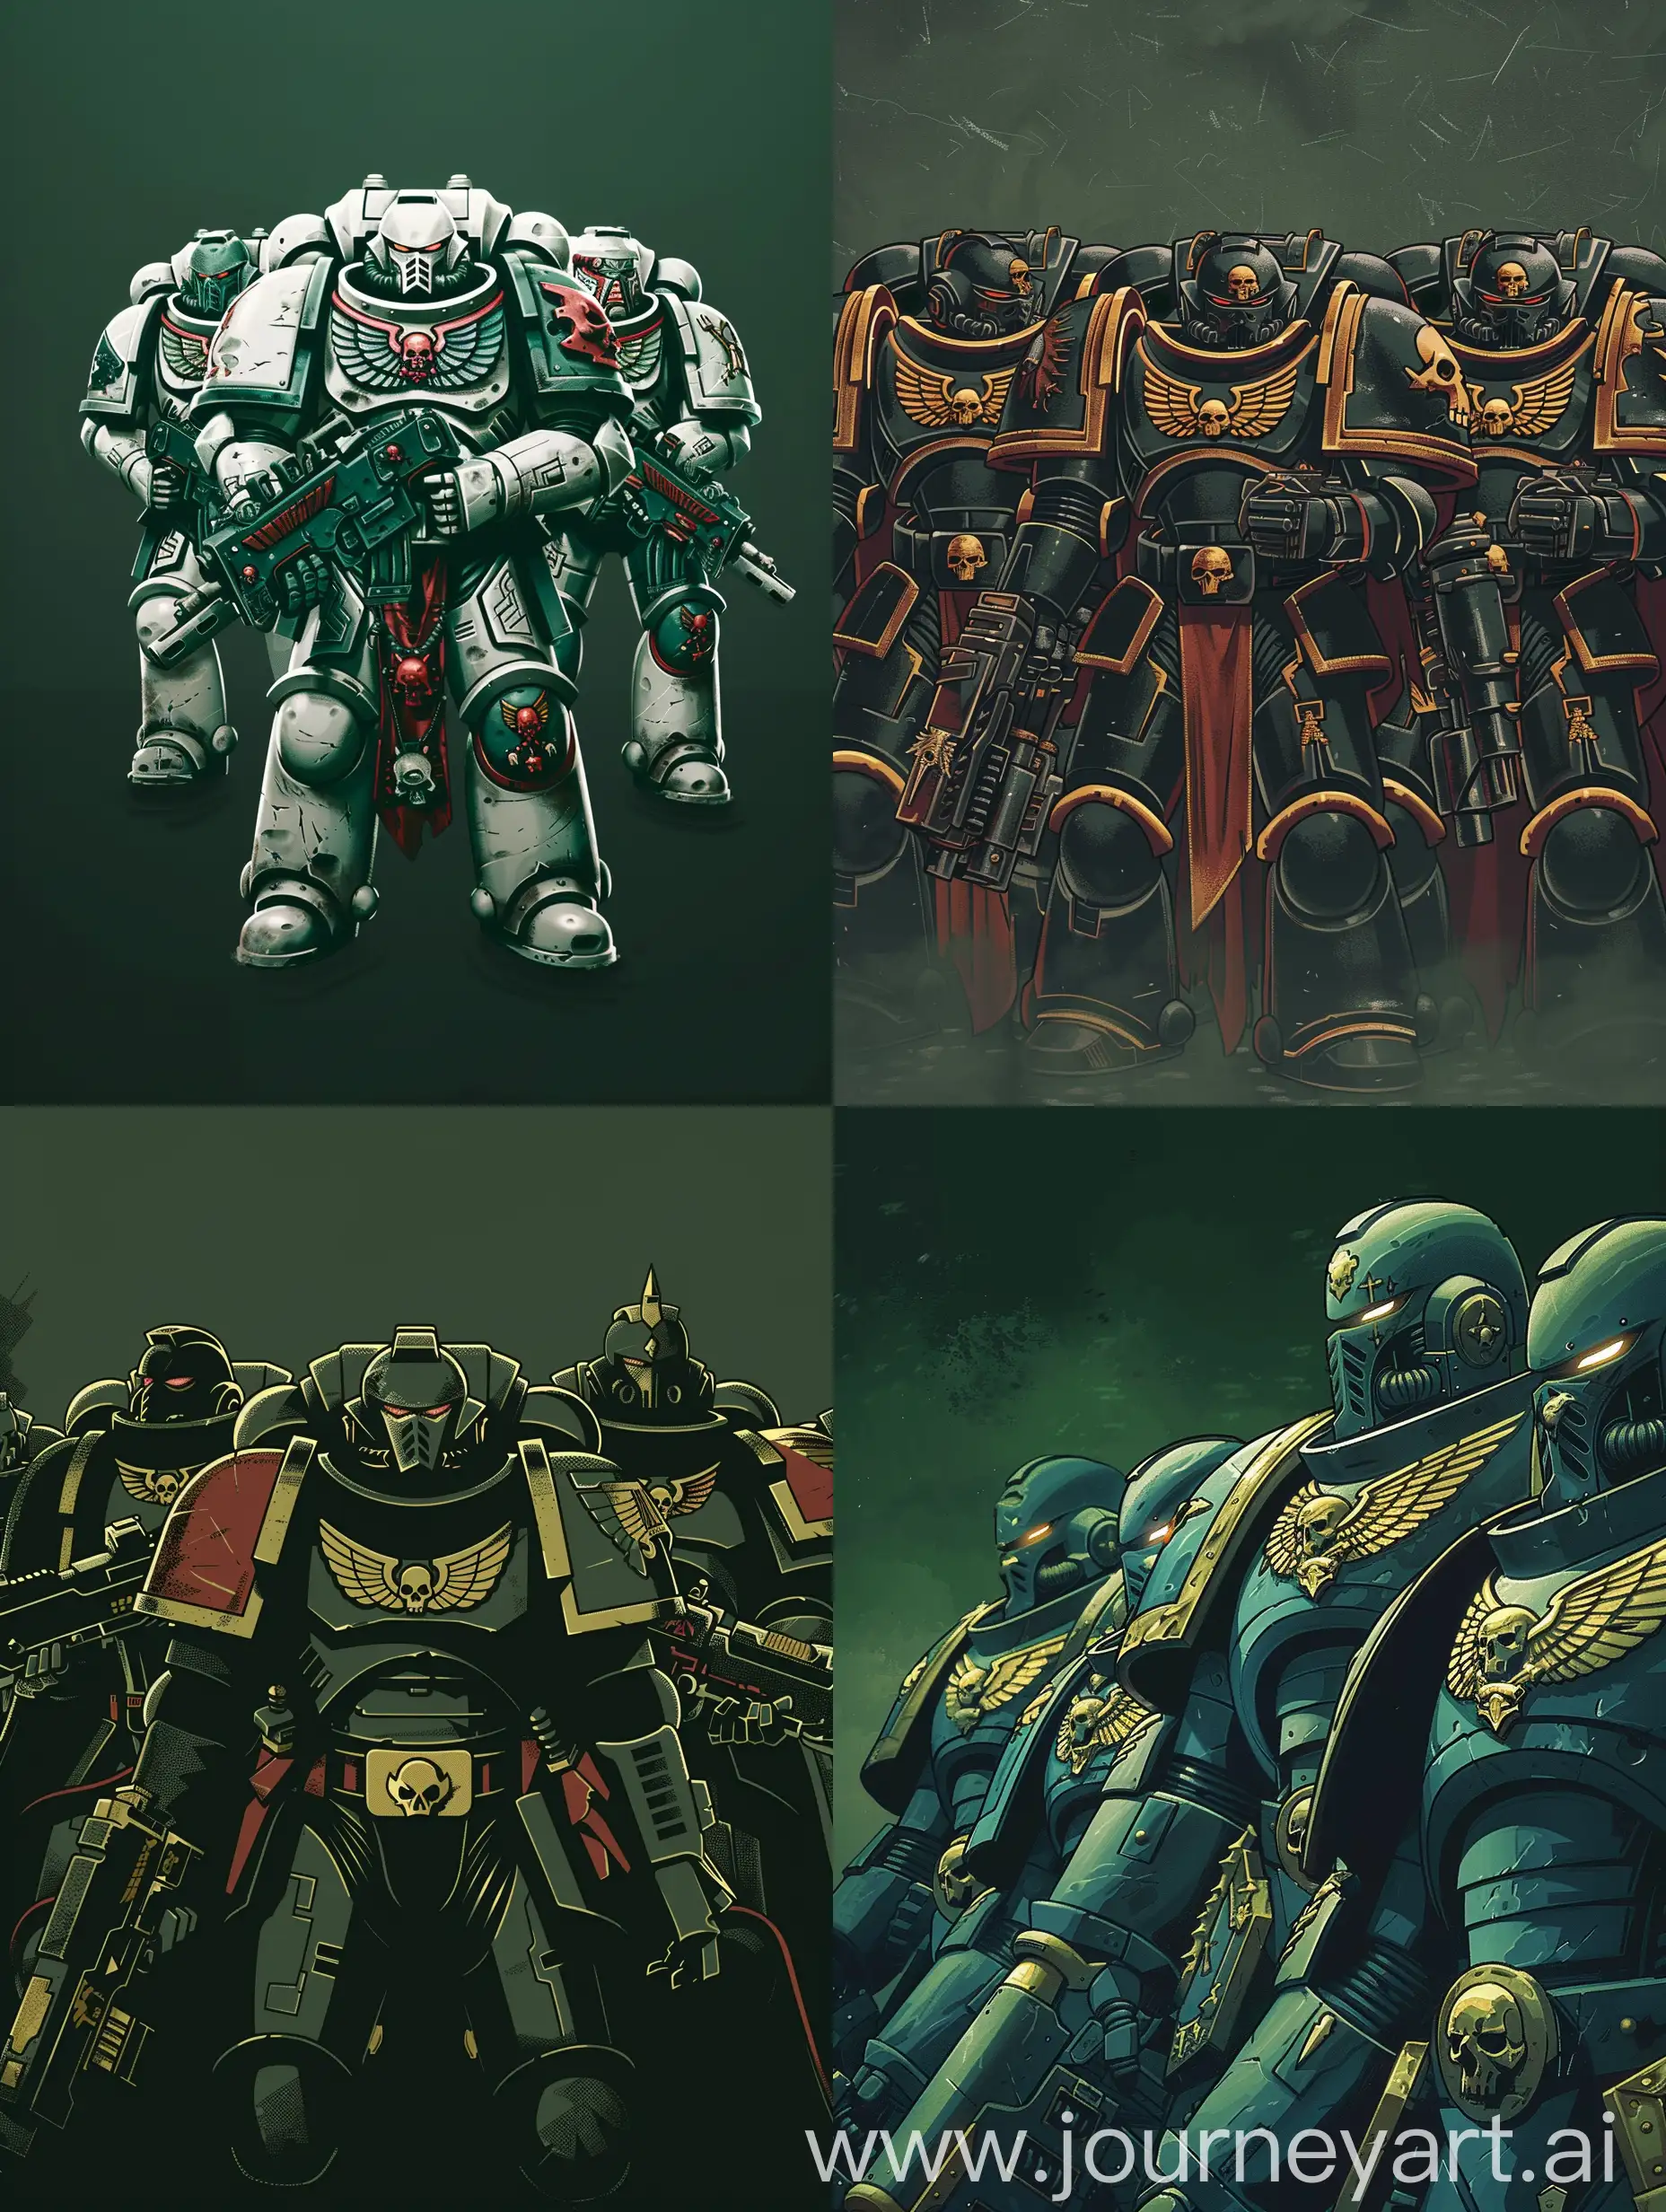 The Ultramarines from the Warhammer 40k universe. The background is dark green.